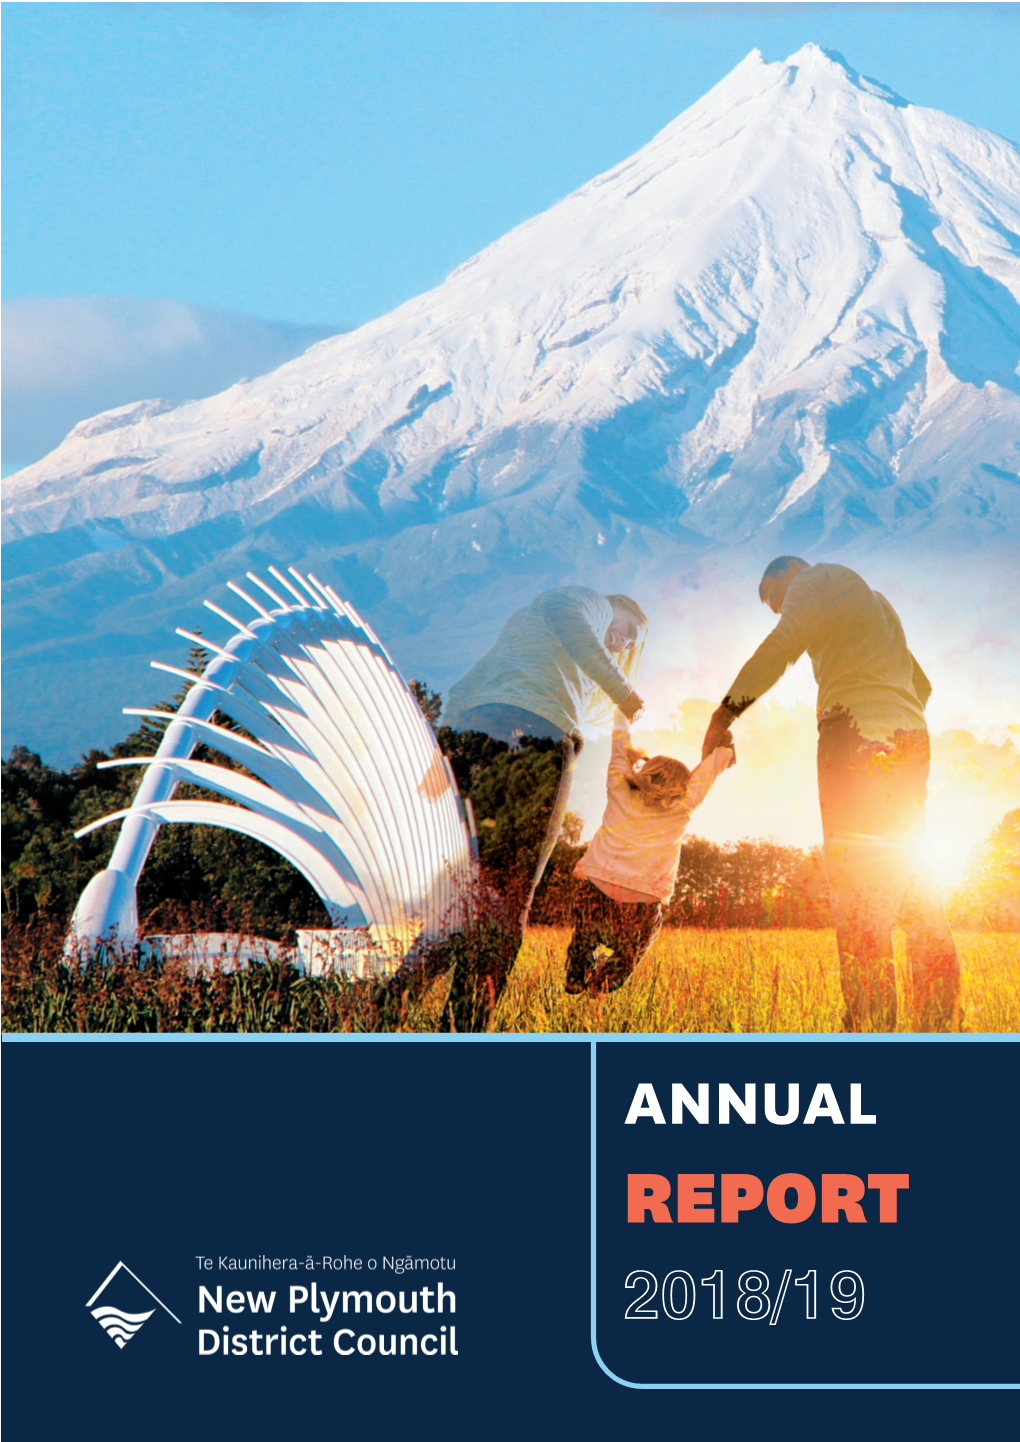 ANNUAL REPORT 2018/19 Welcome to NPDC’S Annual Report for 2018/19 the Annual Report Is Our Way of Being Accountable to You